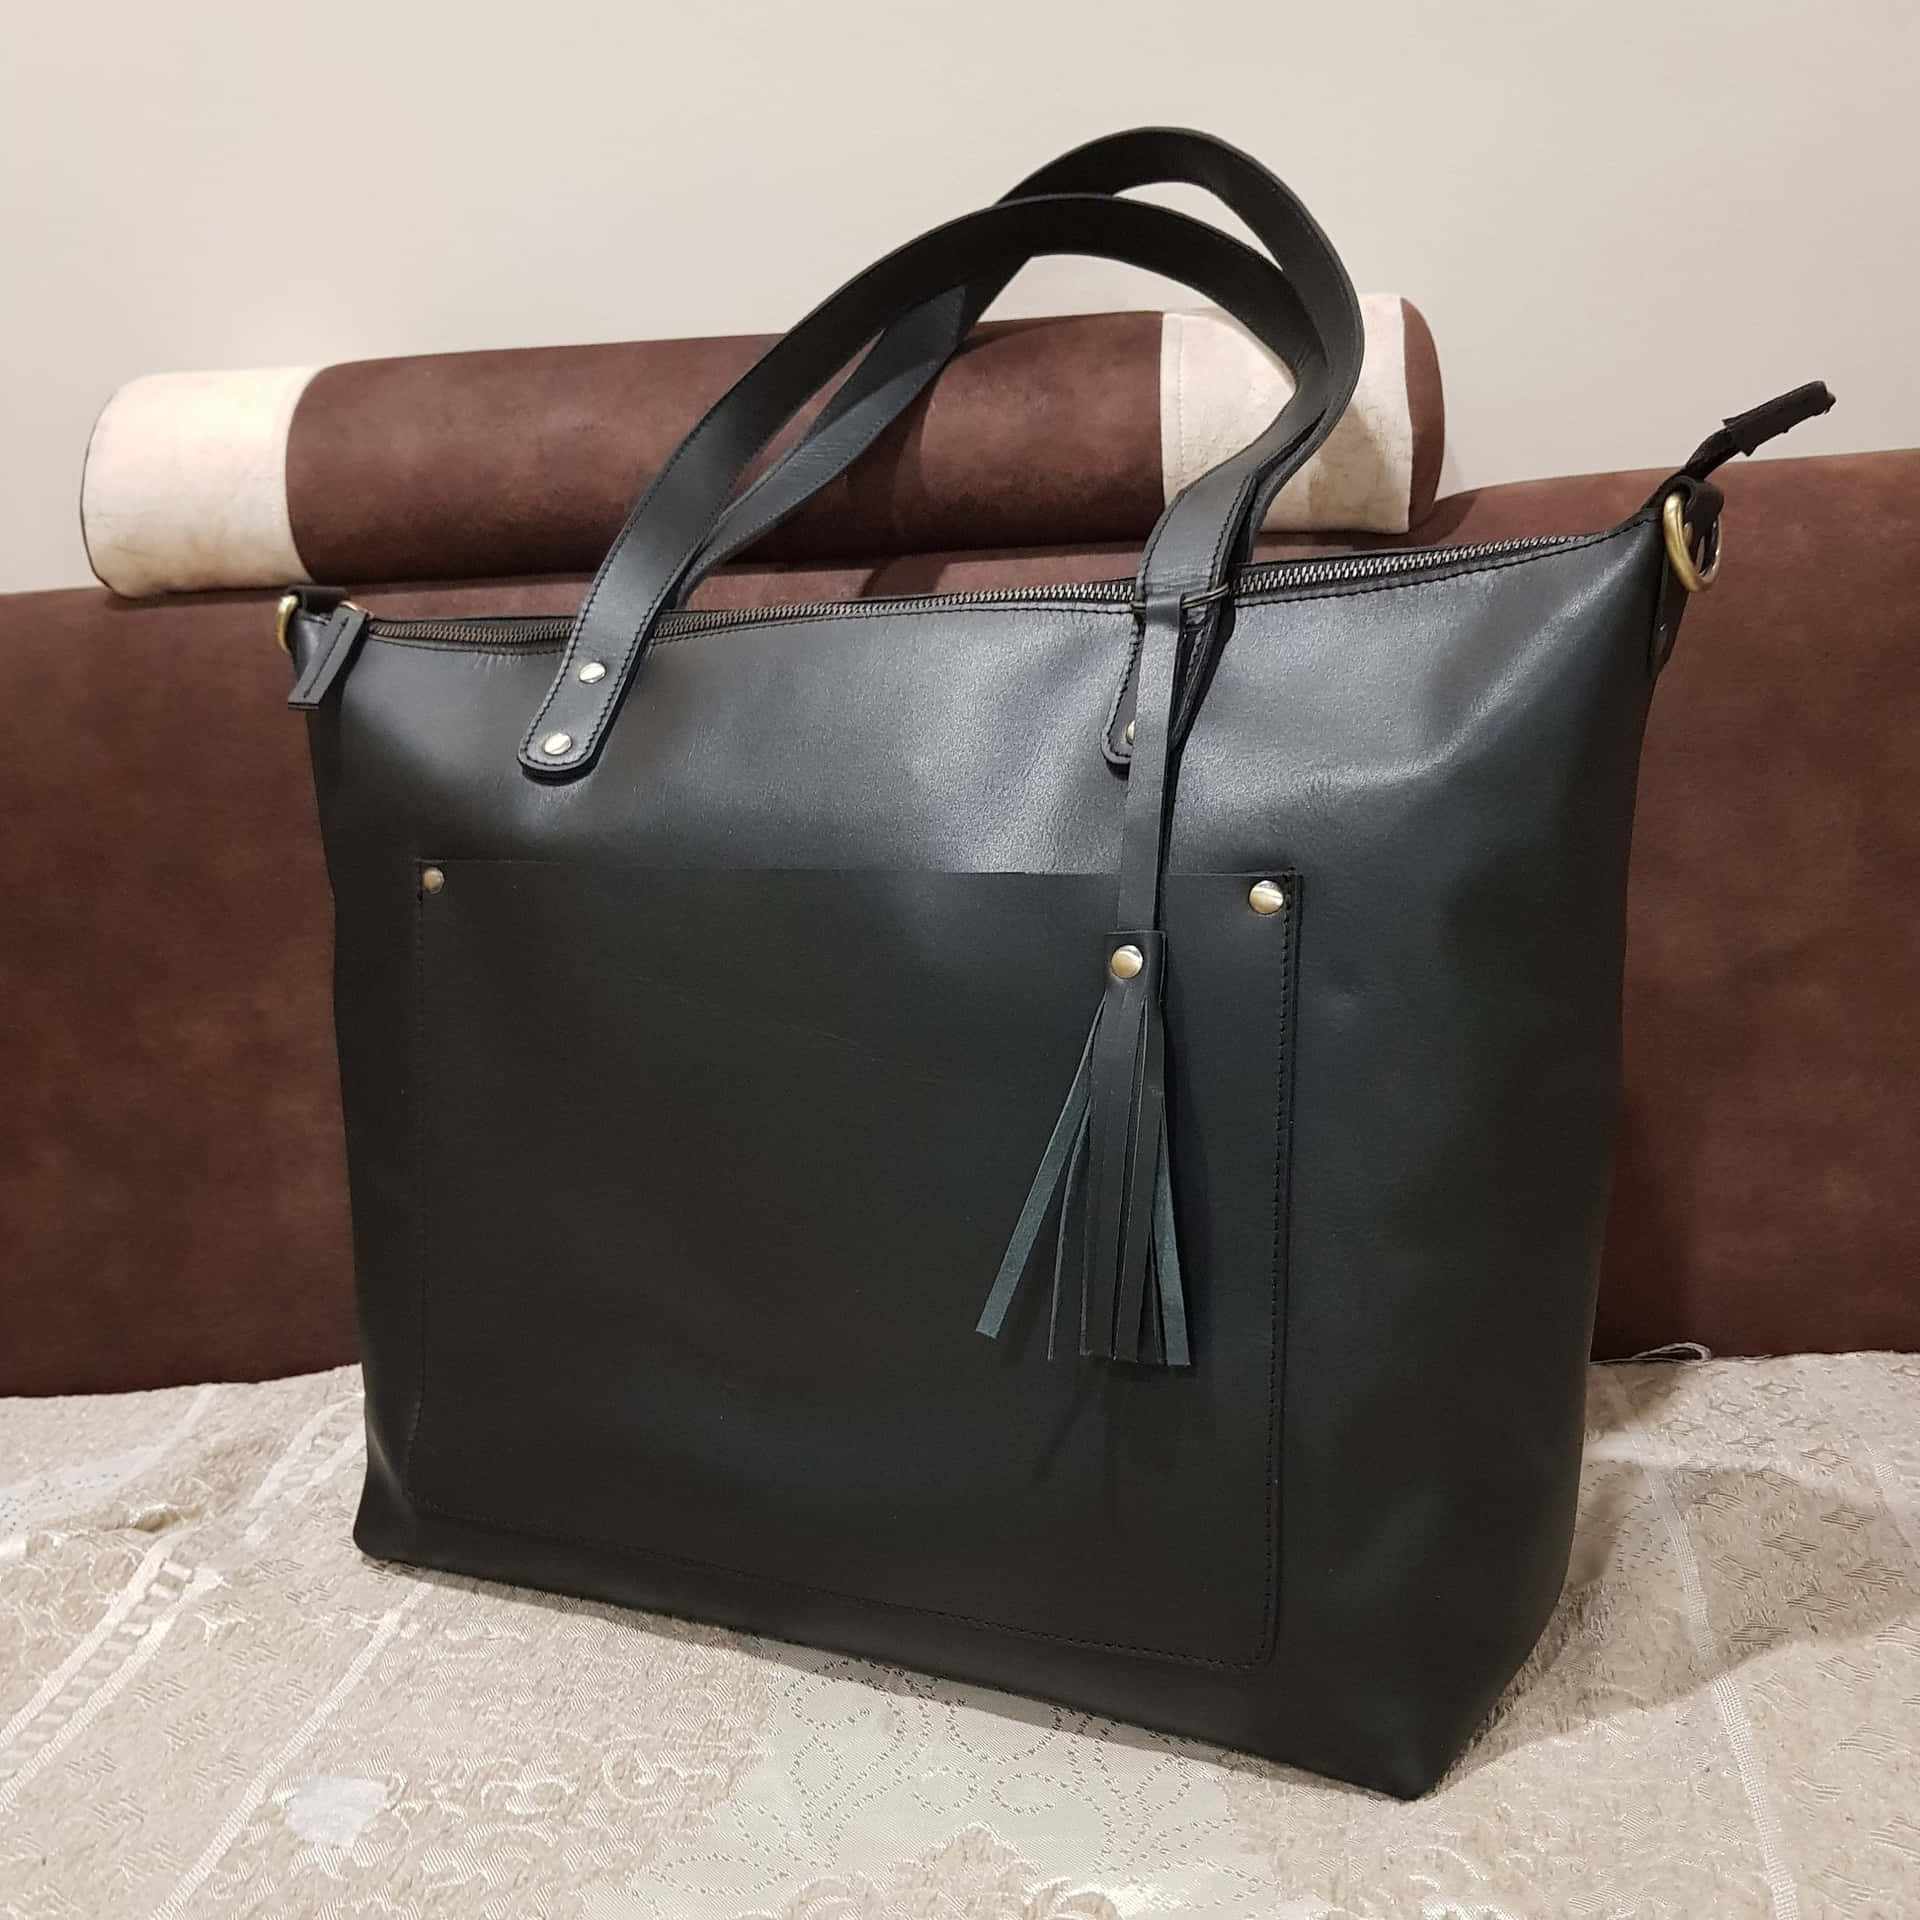 A Black Leather Tote Bag With A Tassel